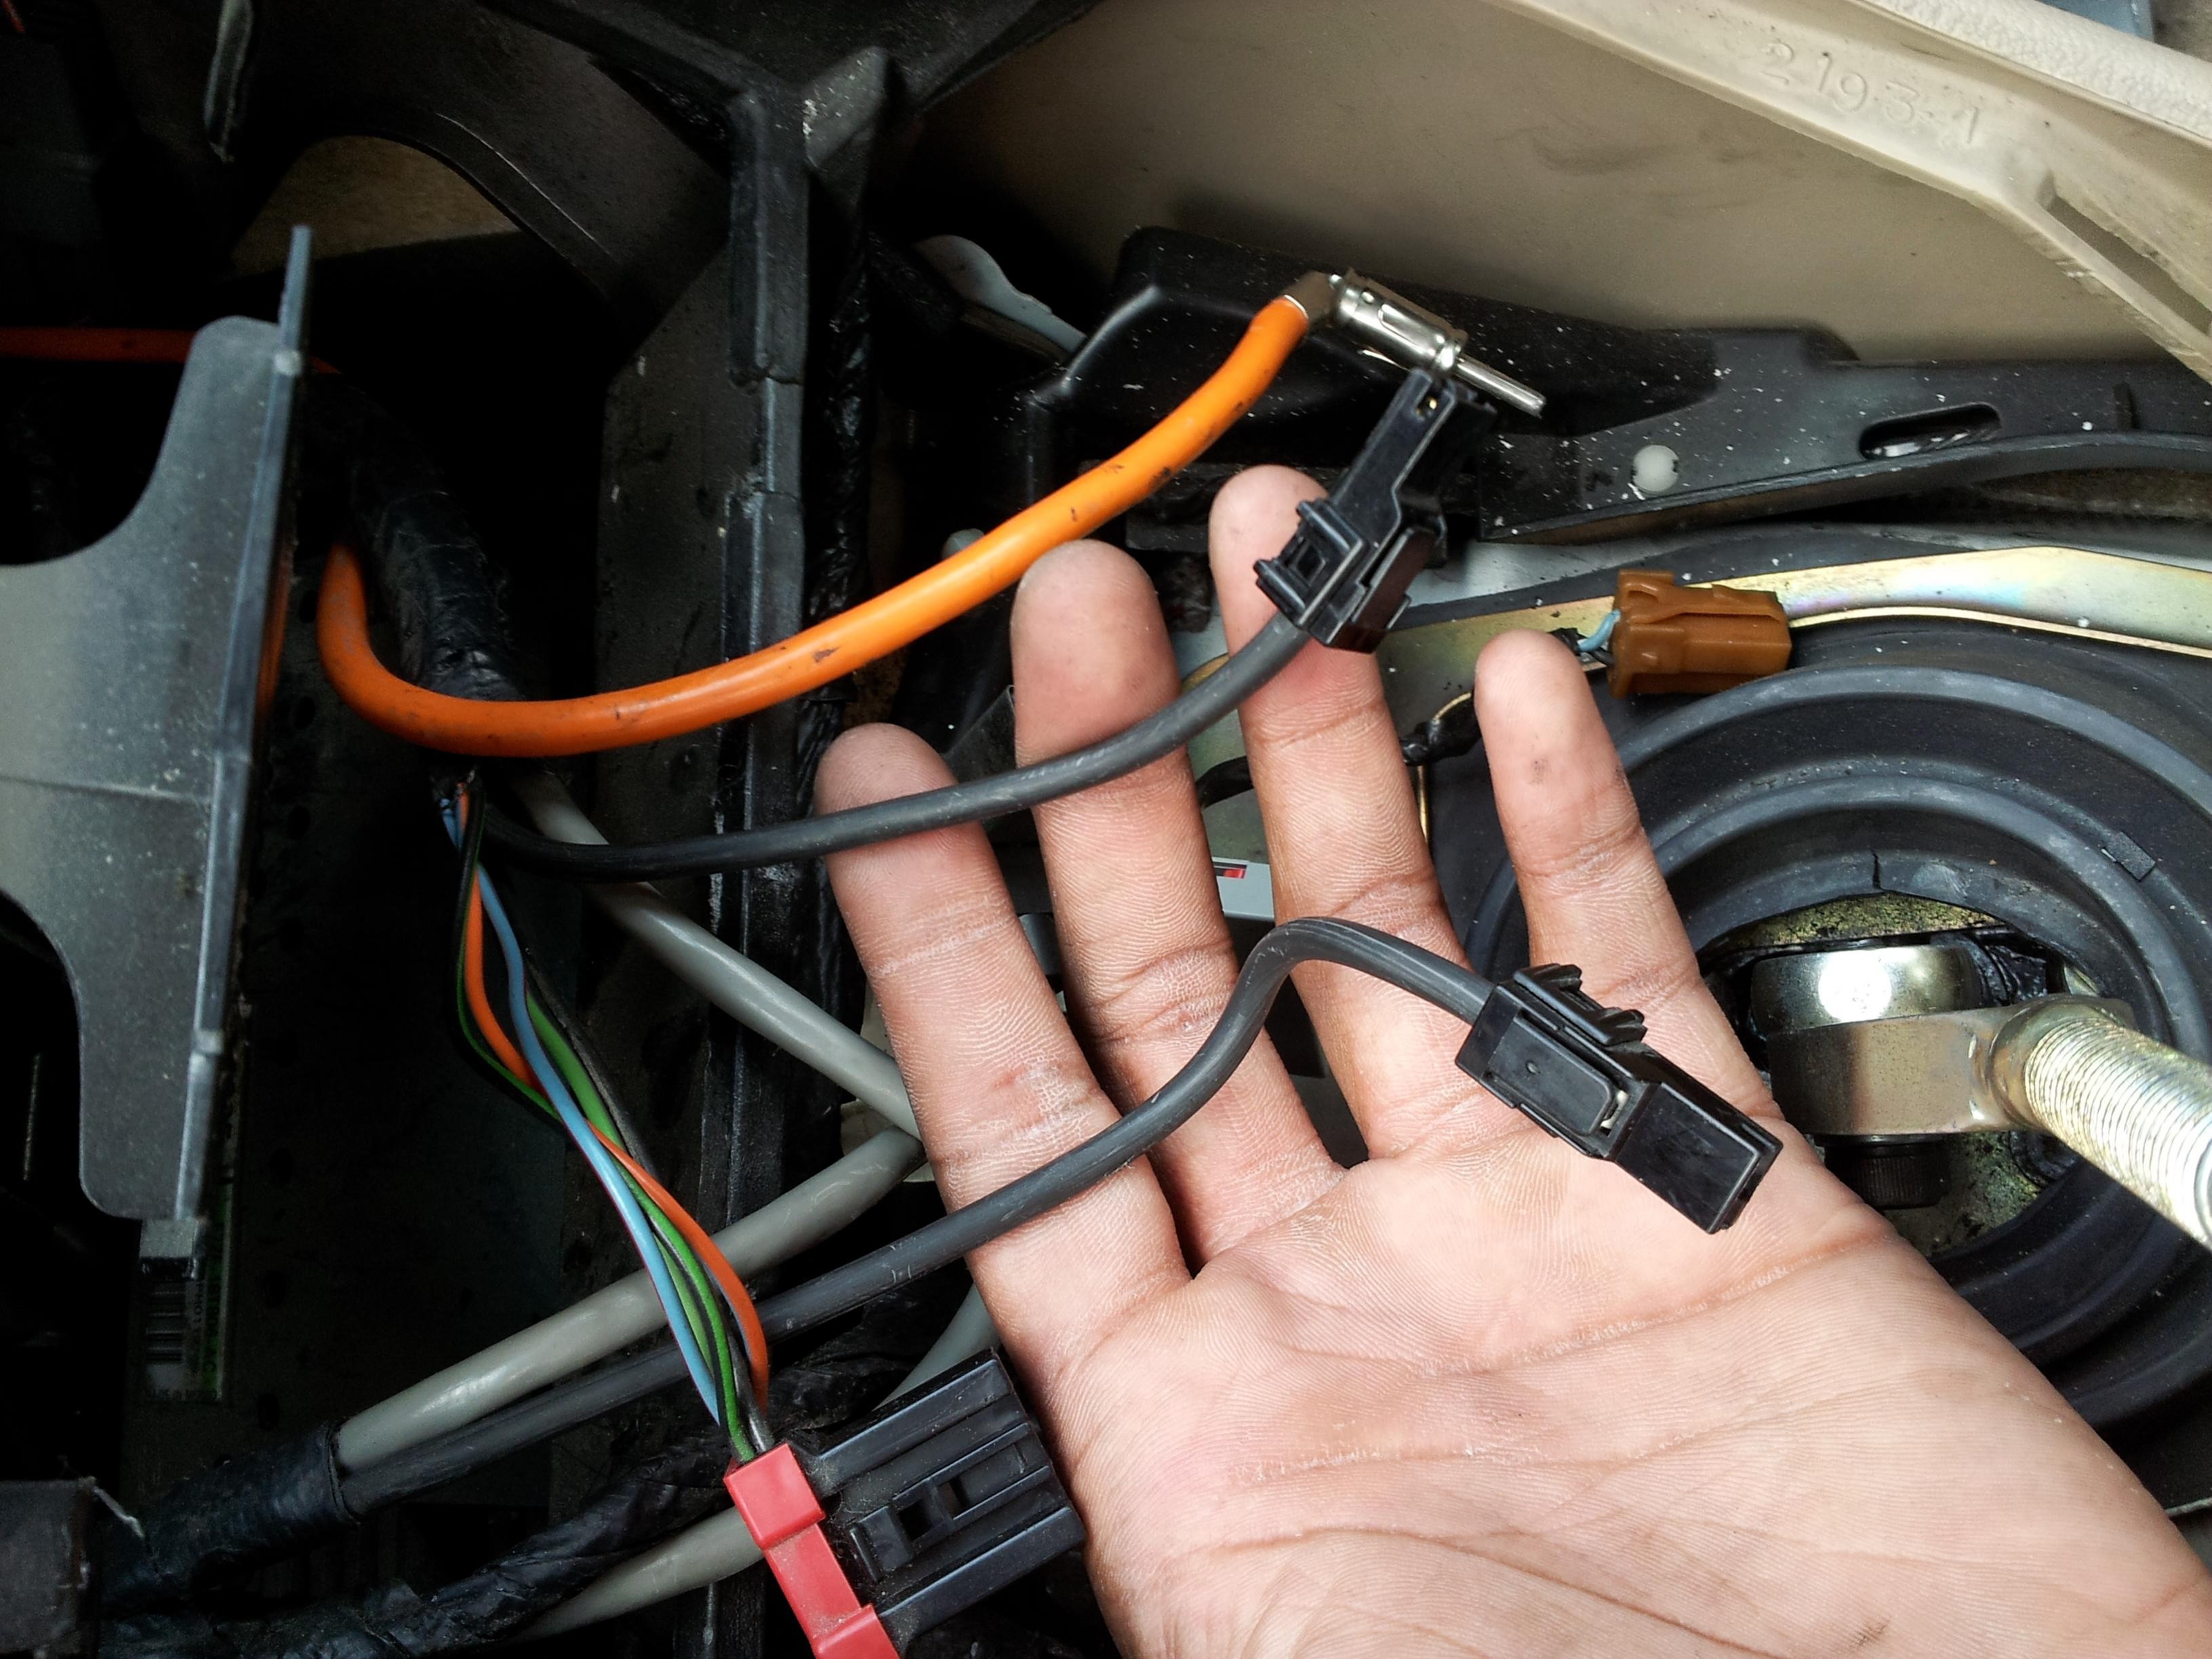 1998 Ford Mustang Stereo Wiring Diagram Me Endear